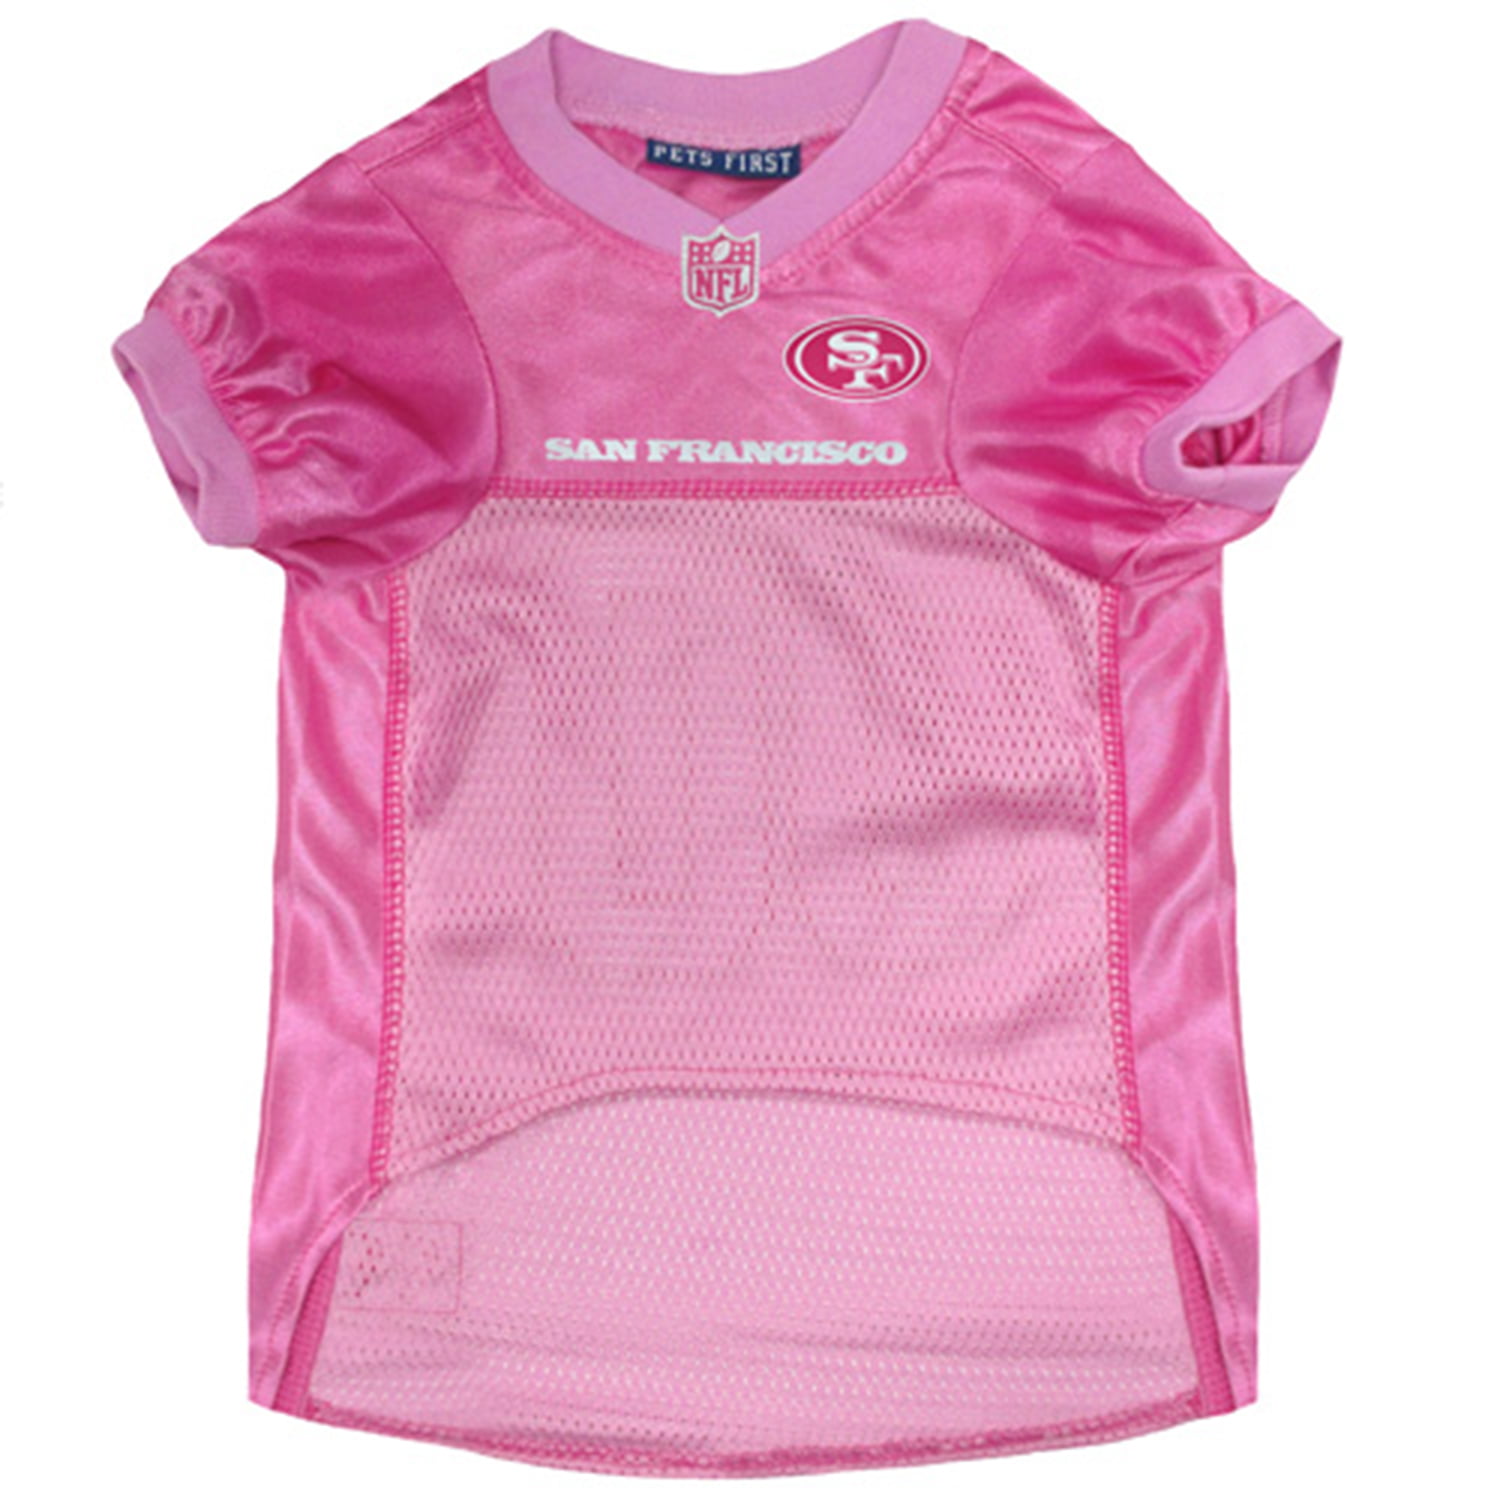 49ers jersey pink